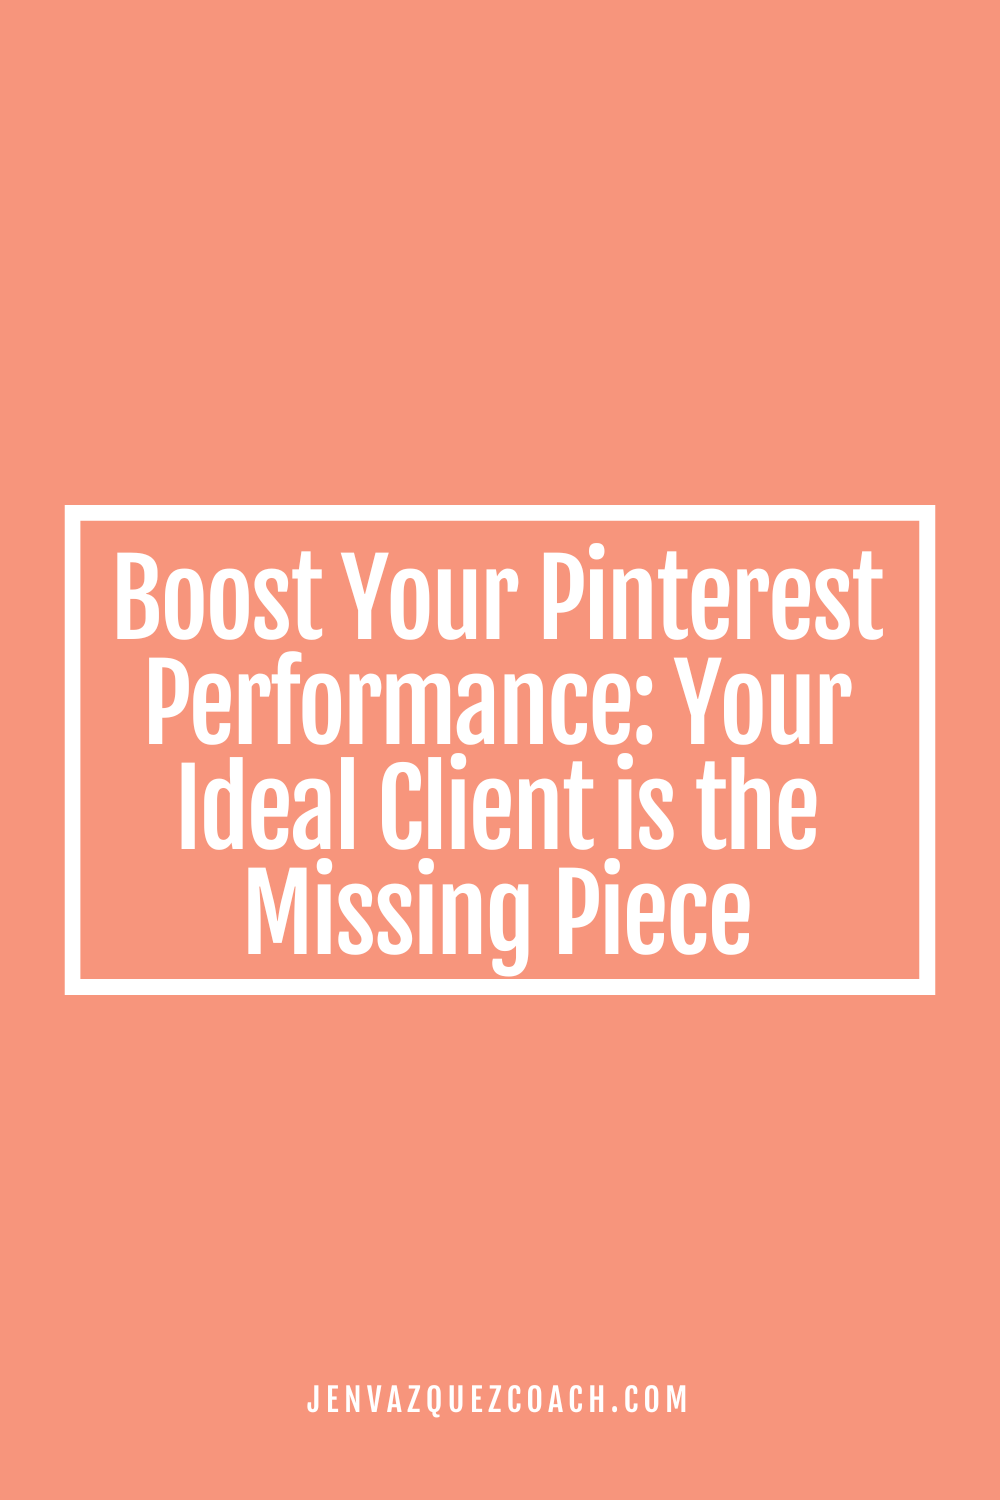 Boost Your Pinterest Performance Your Ideal Client is the Missing Piece